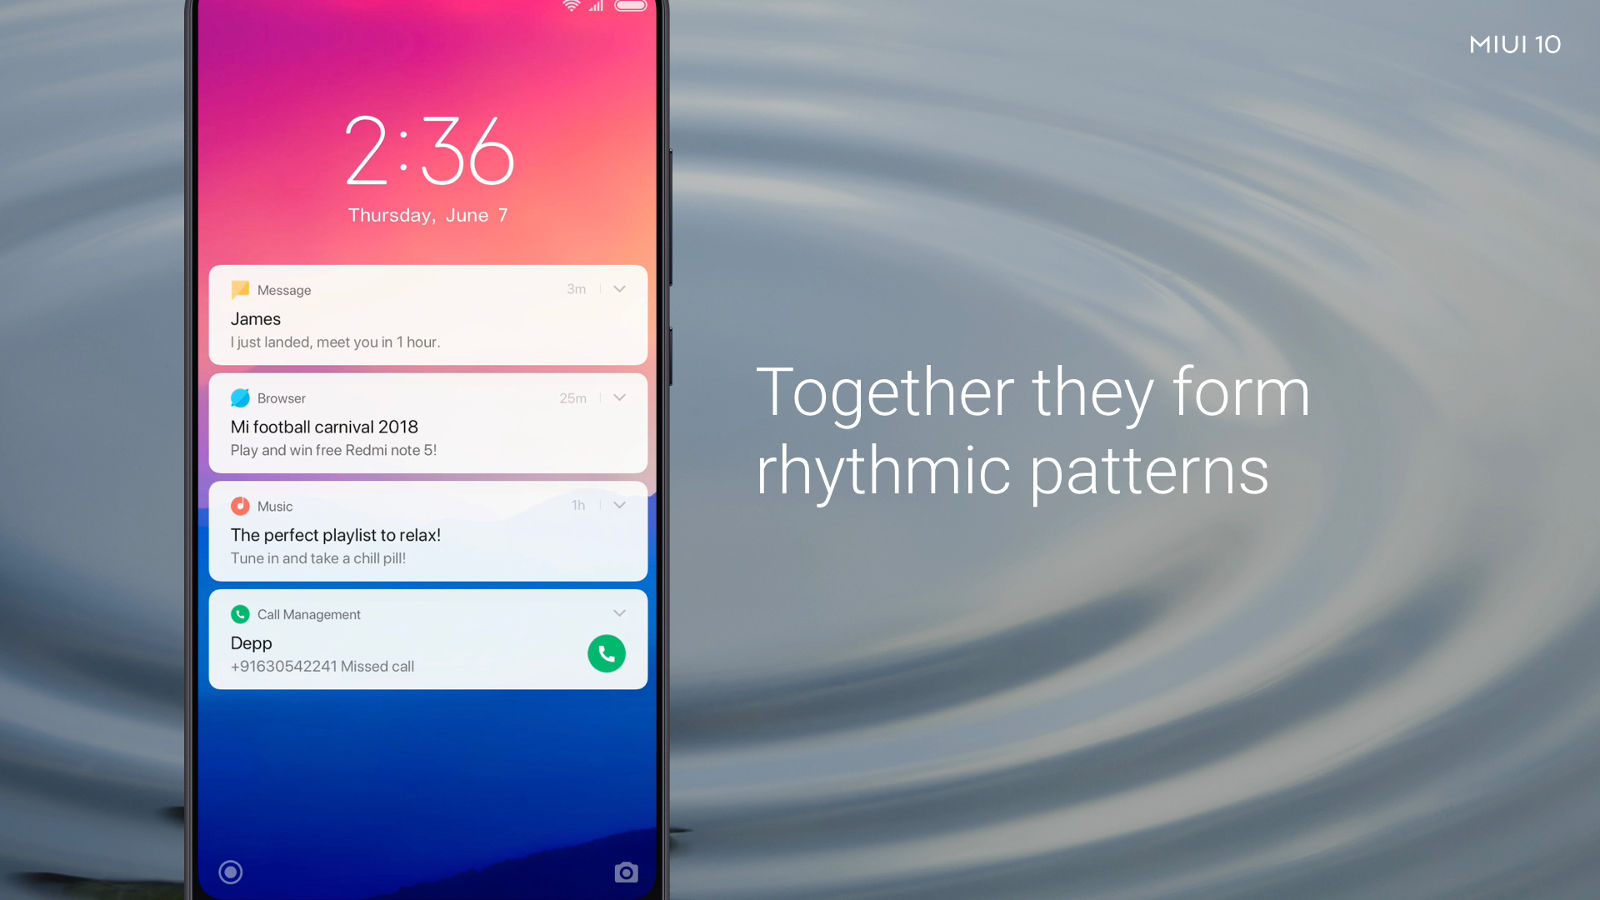 The nature-inspired notification sounds in MIUI 10.